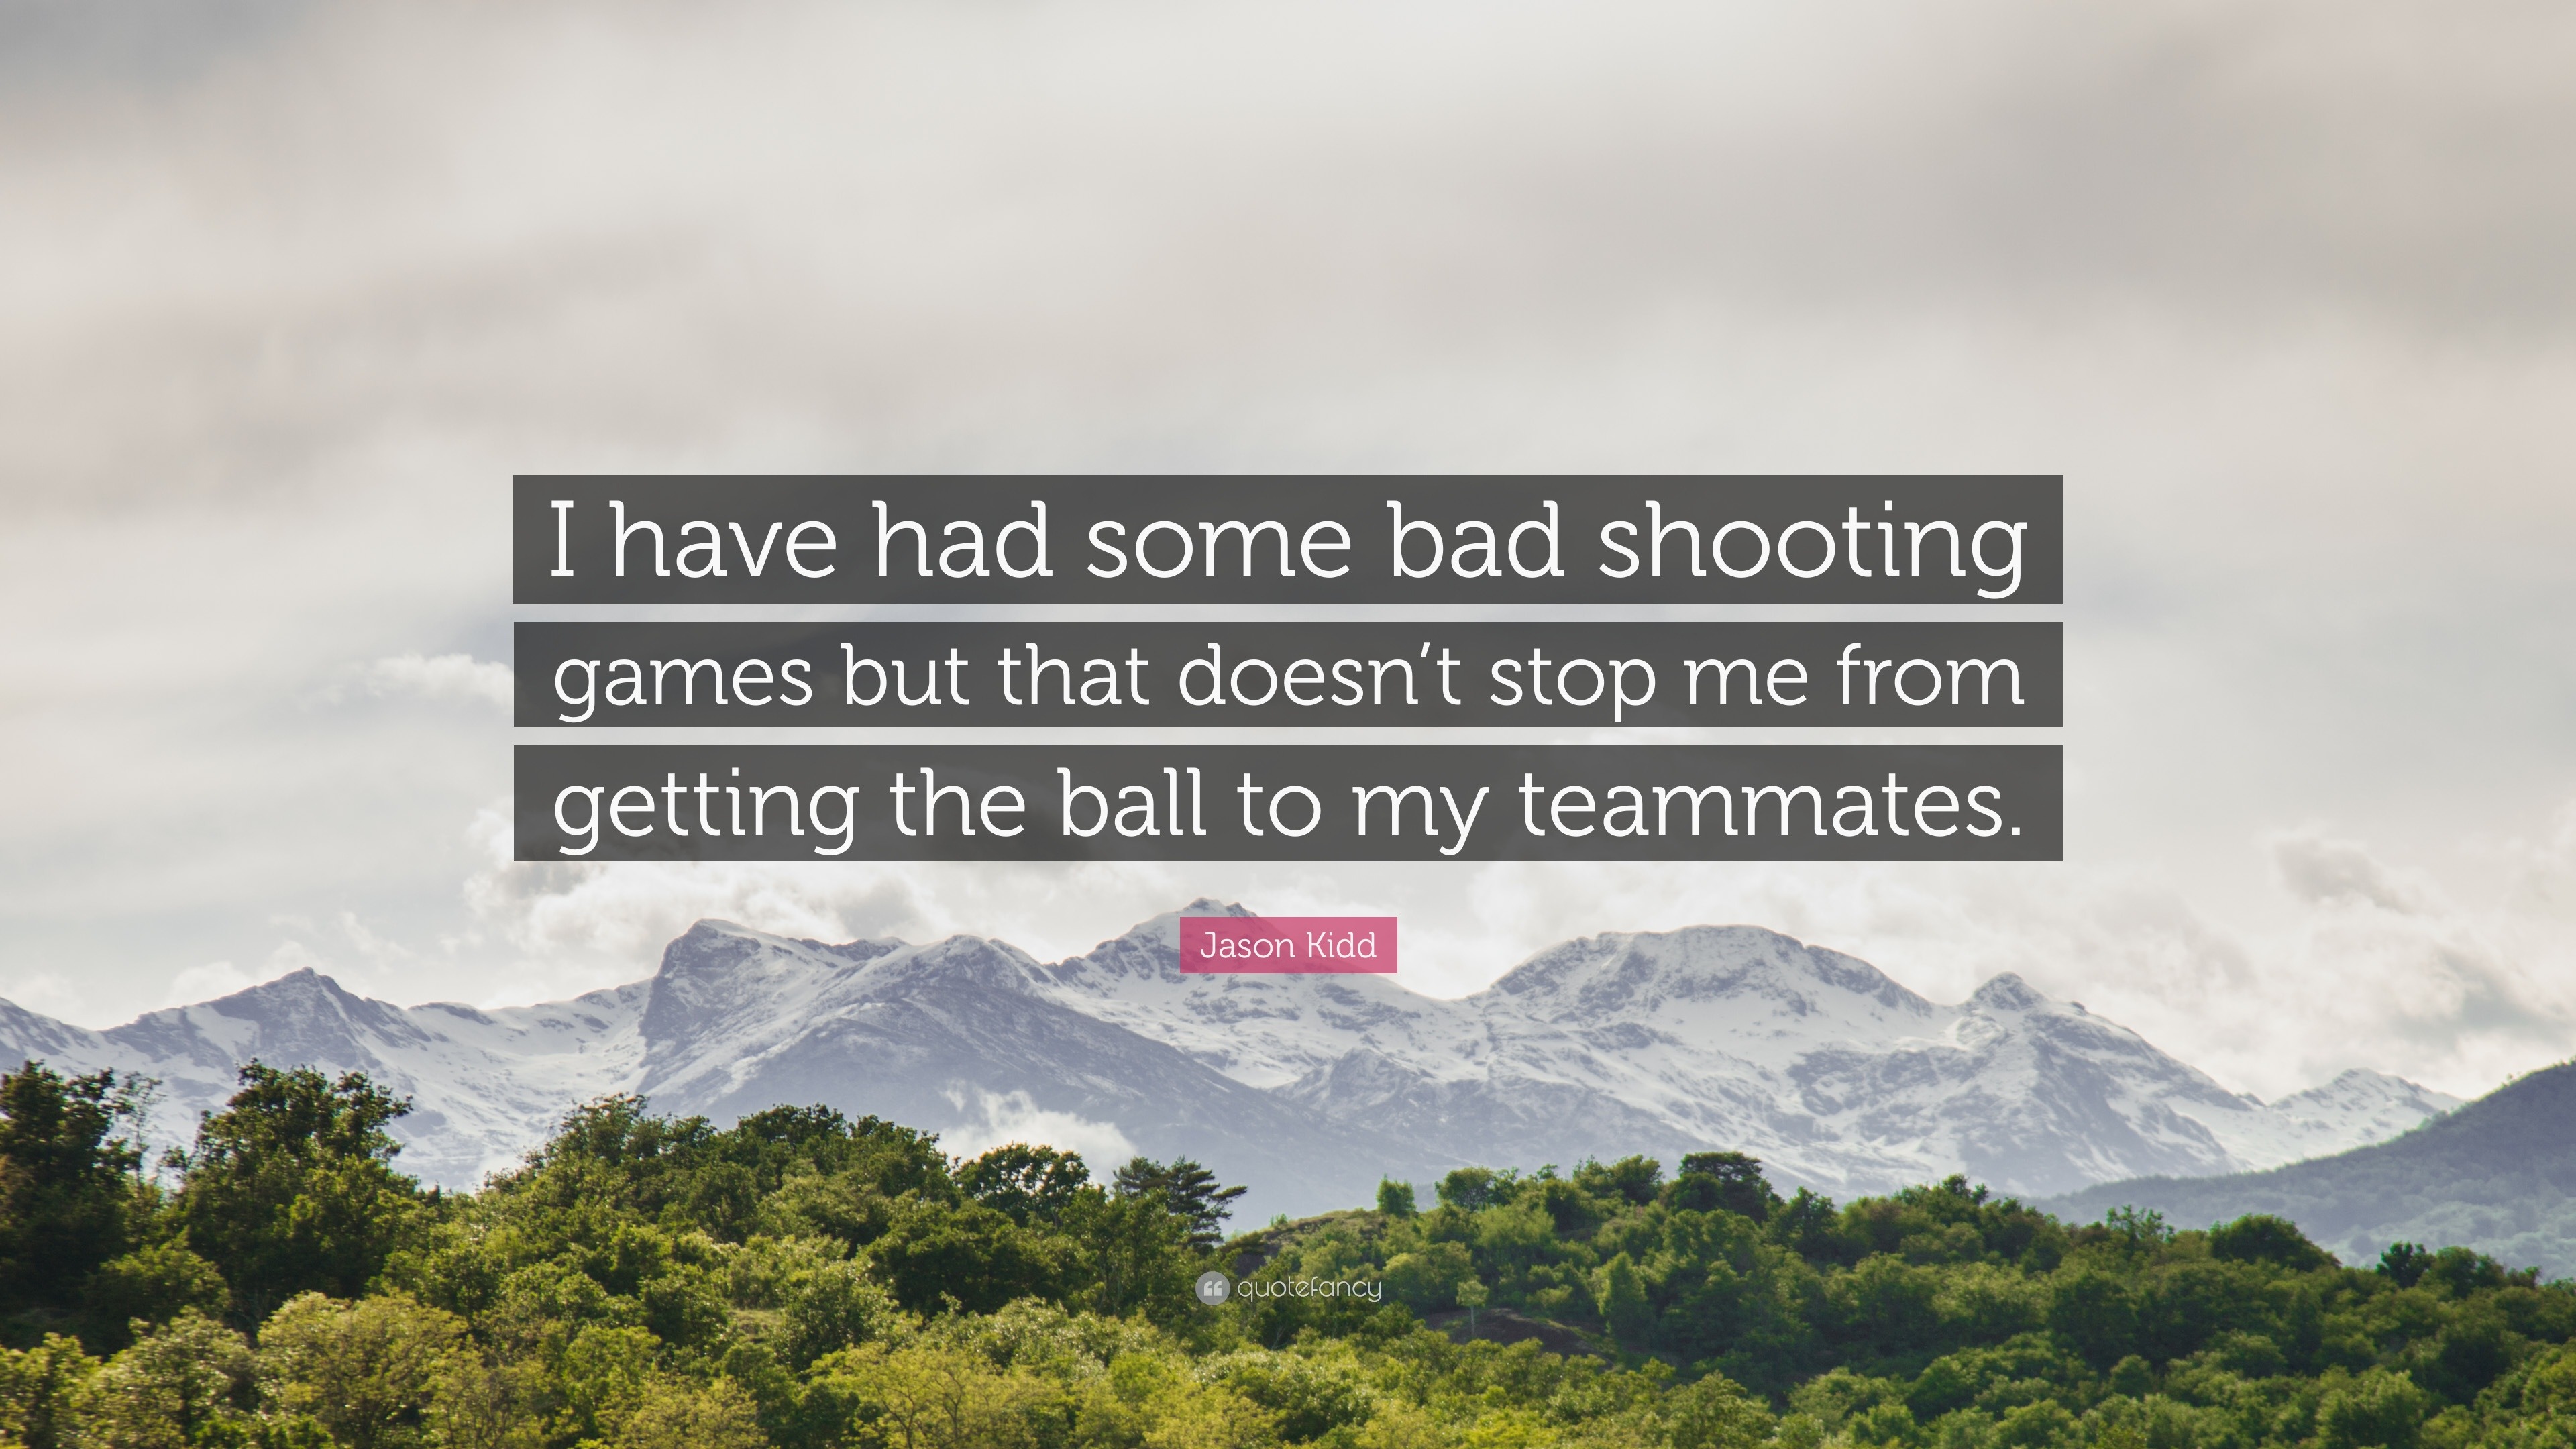 Jason Kidd Quote “I have had some bad shooting games but that doesnt stop me